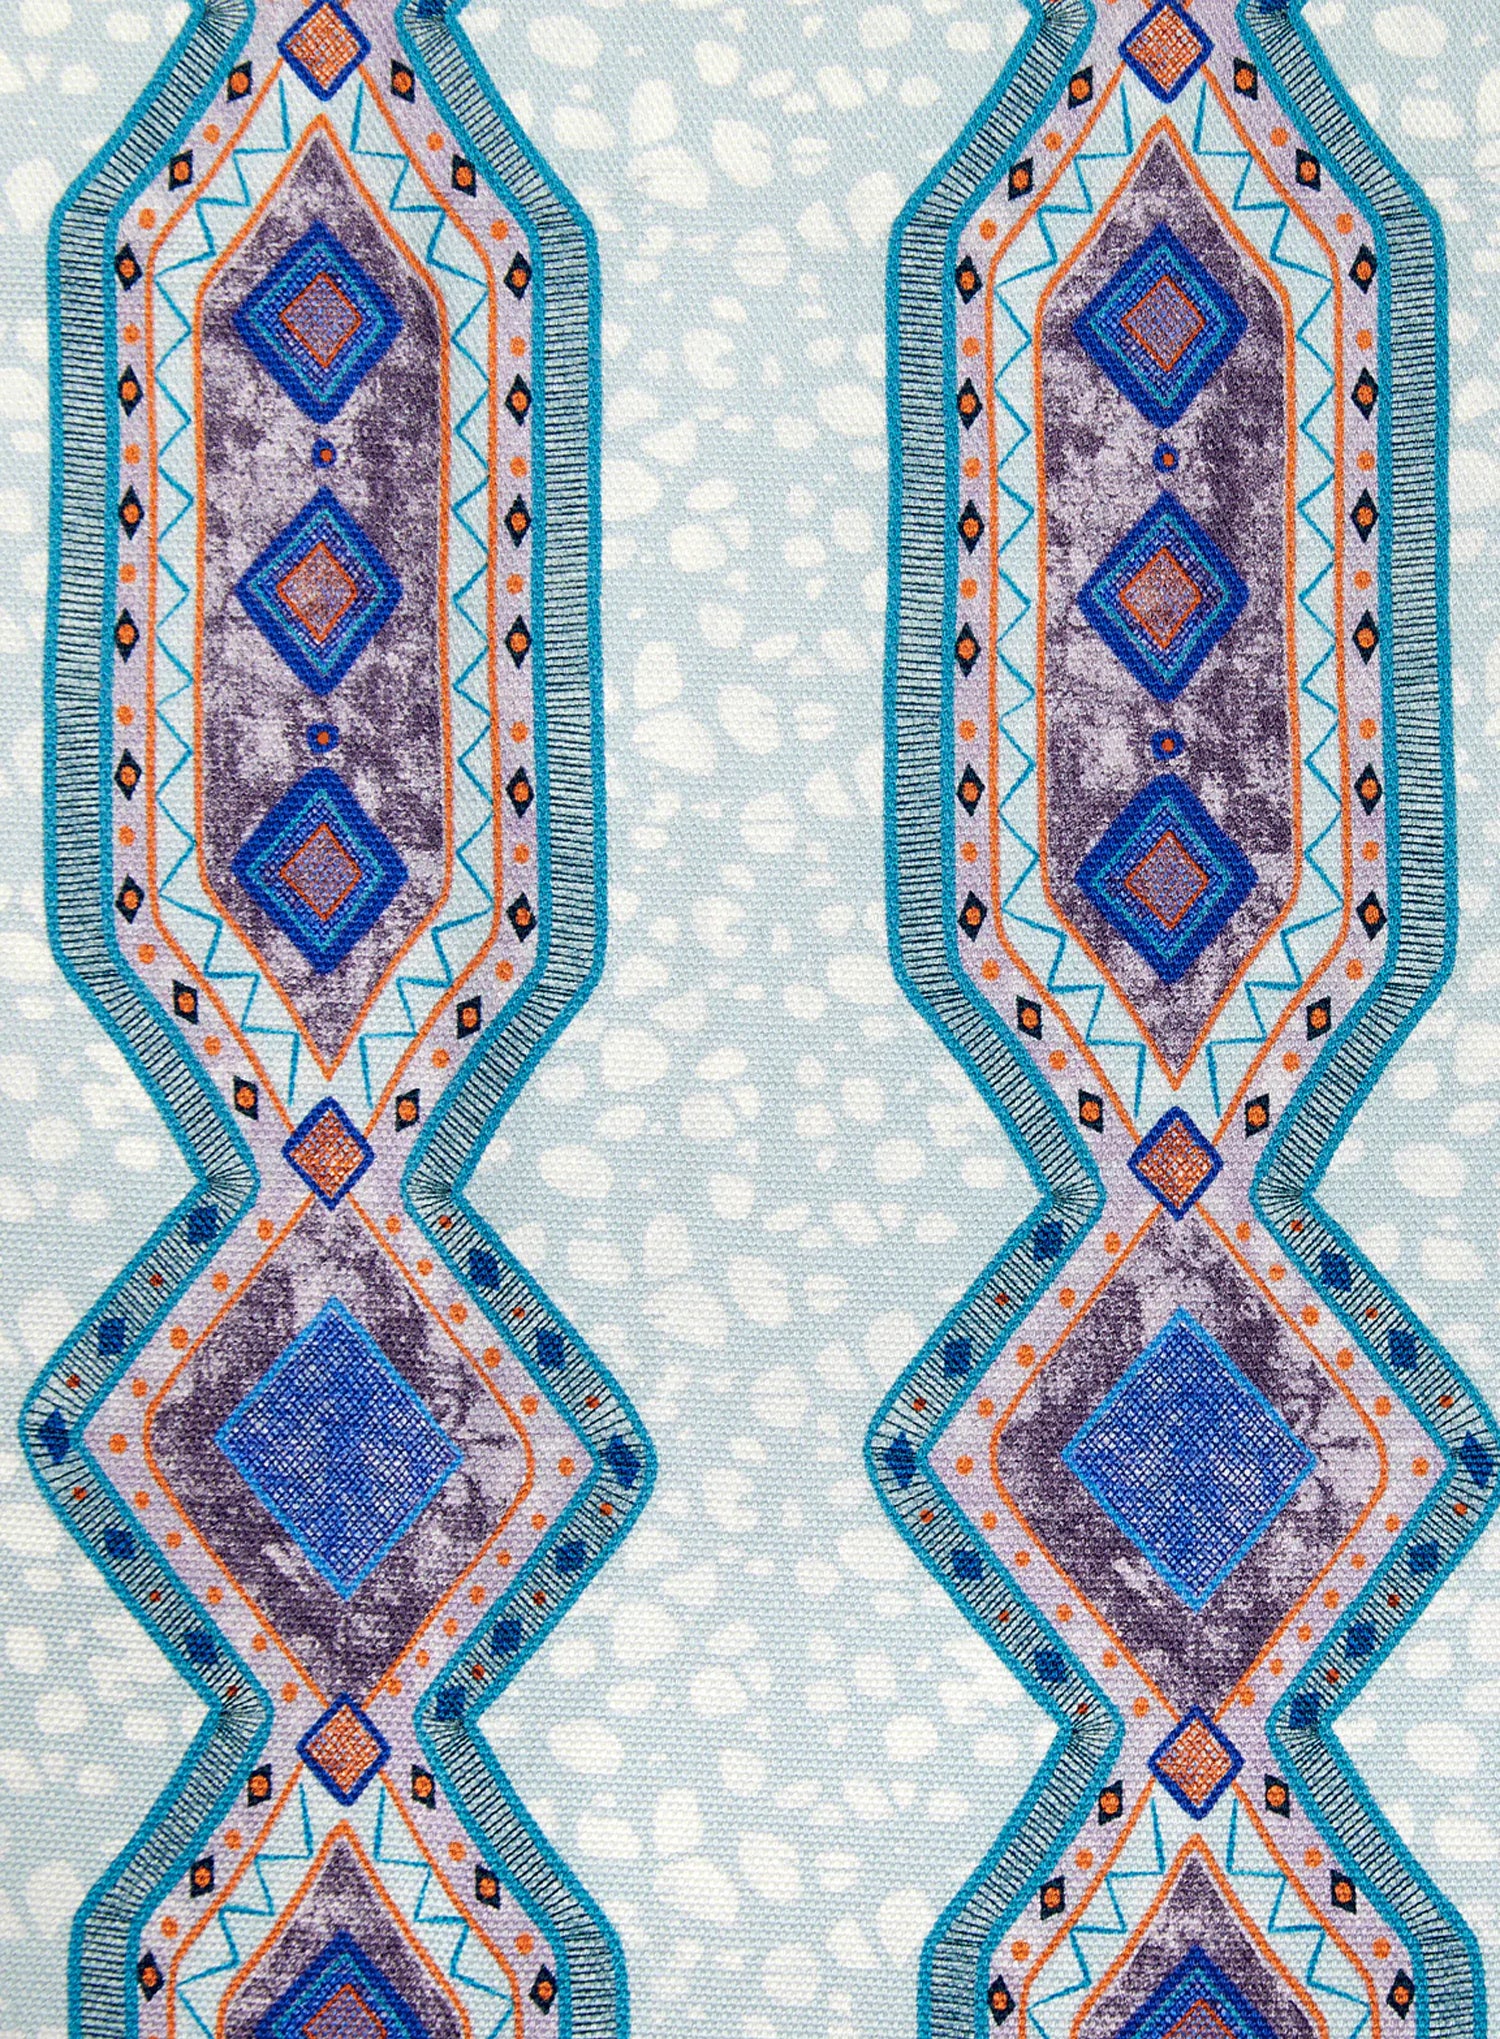 Detail of fabric in a geometric stripe pattern in shades of blue, orange and navy.